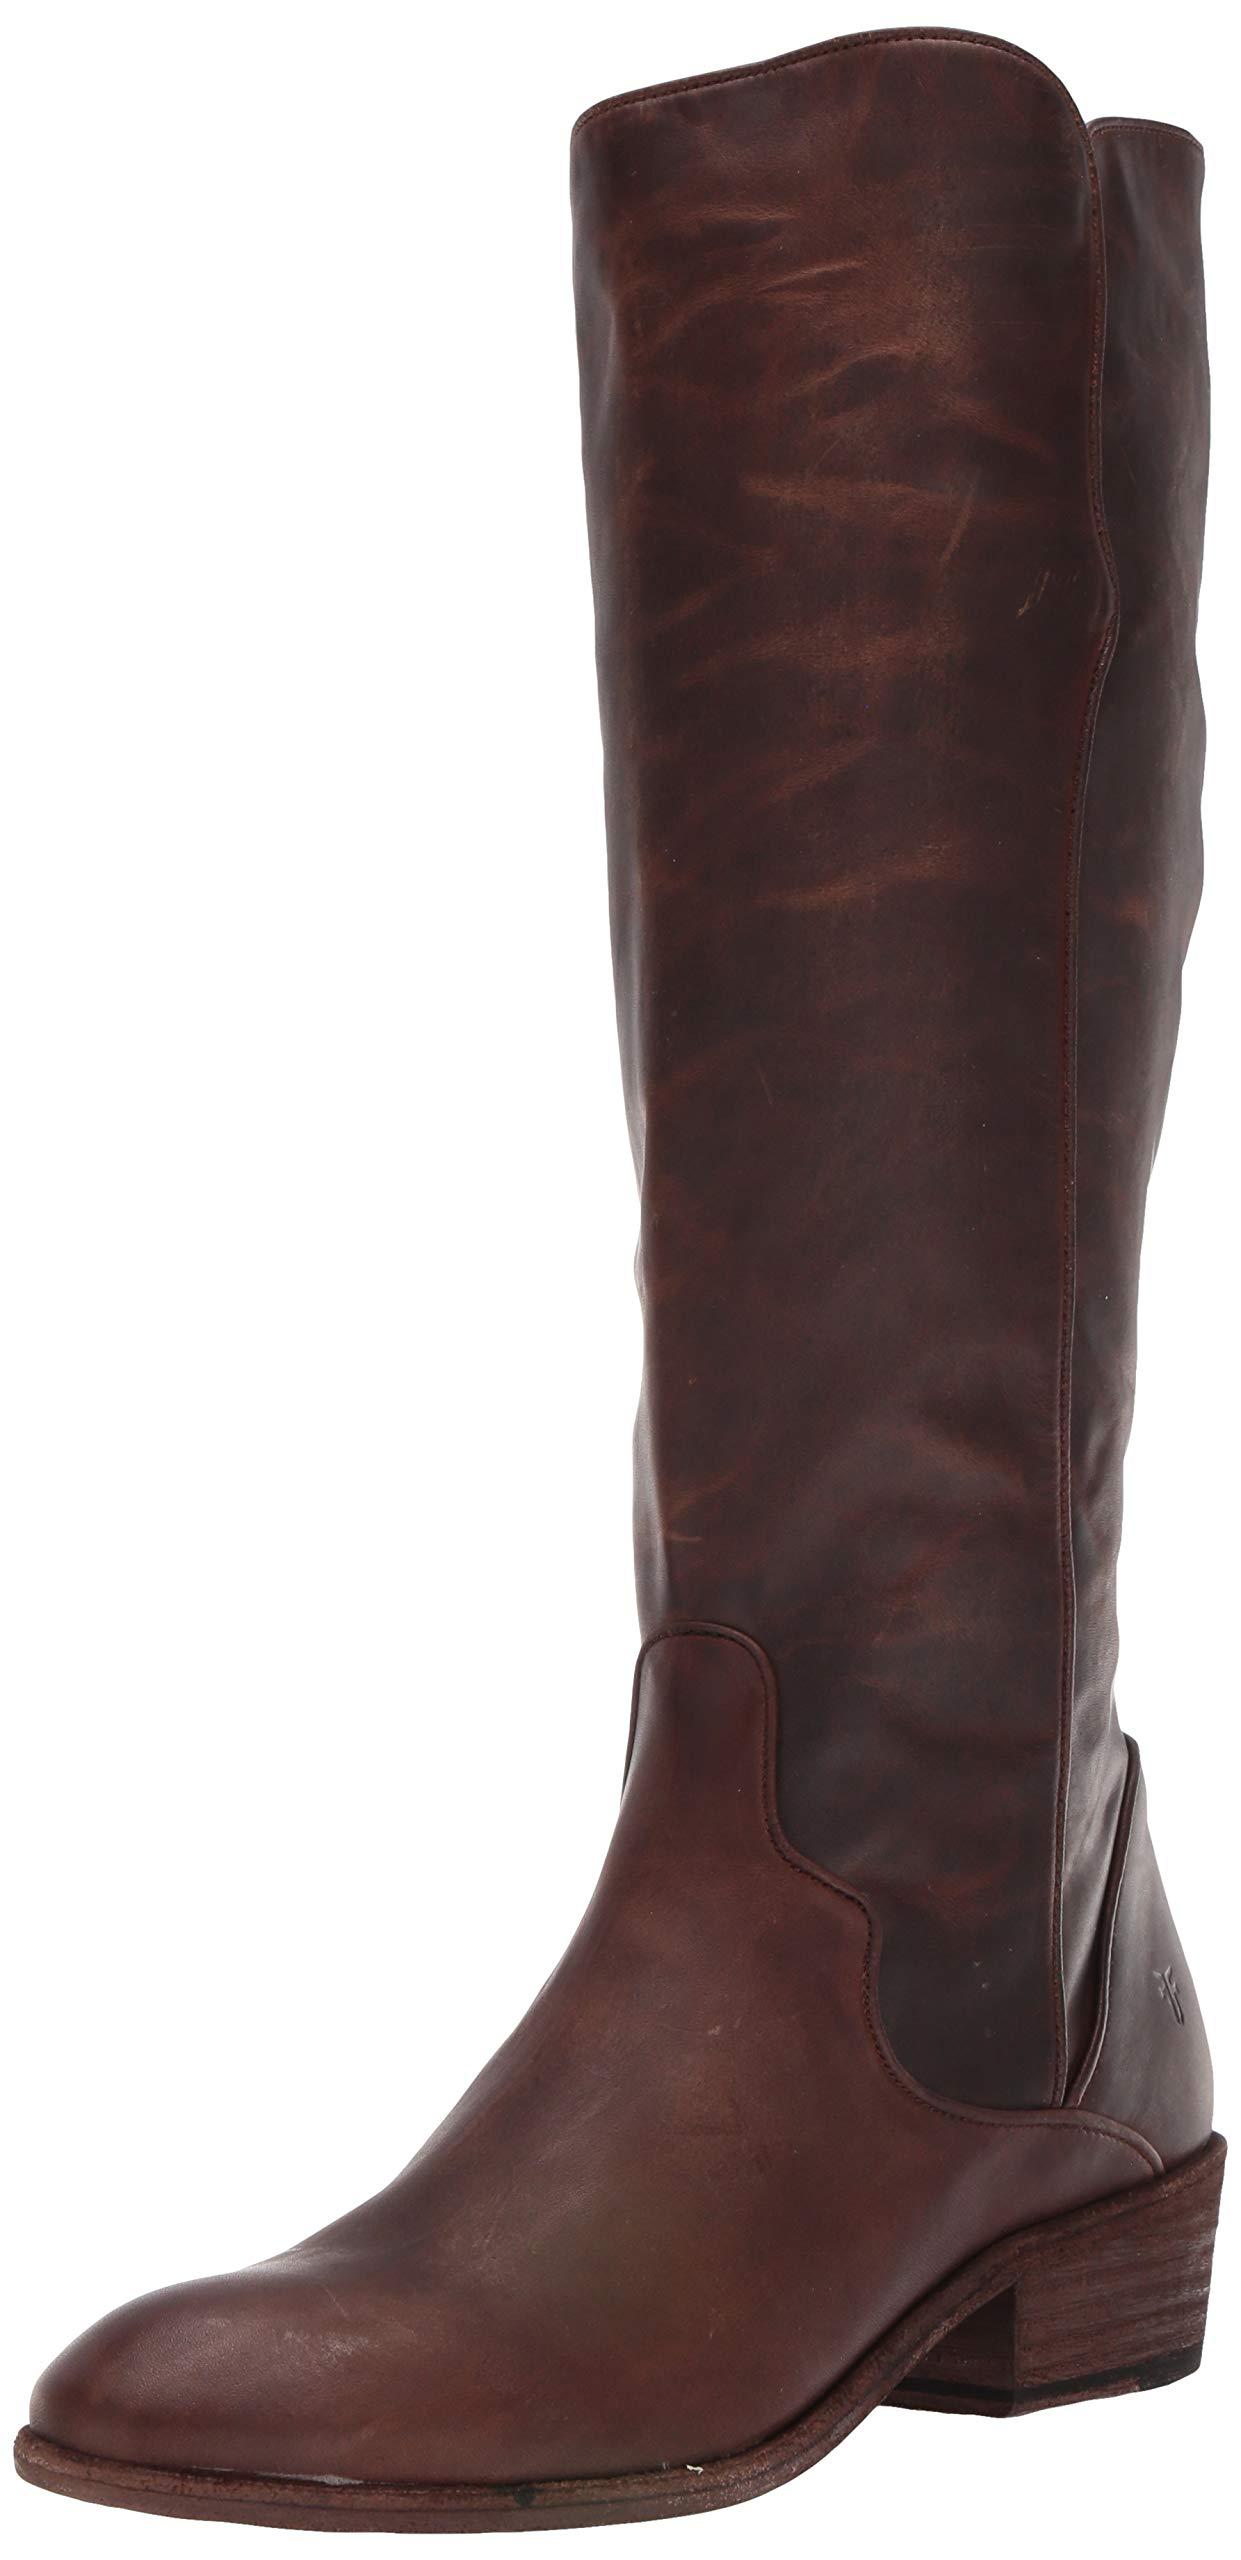 Frye Carson Piping Tall Knee High Boot in Brown - Lyst